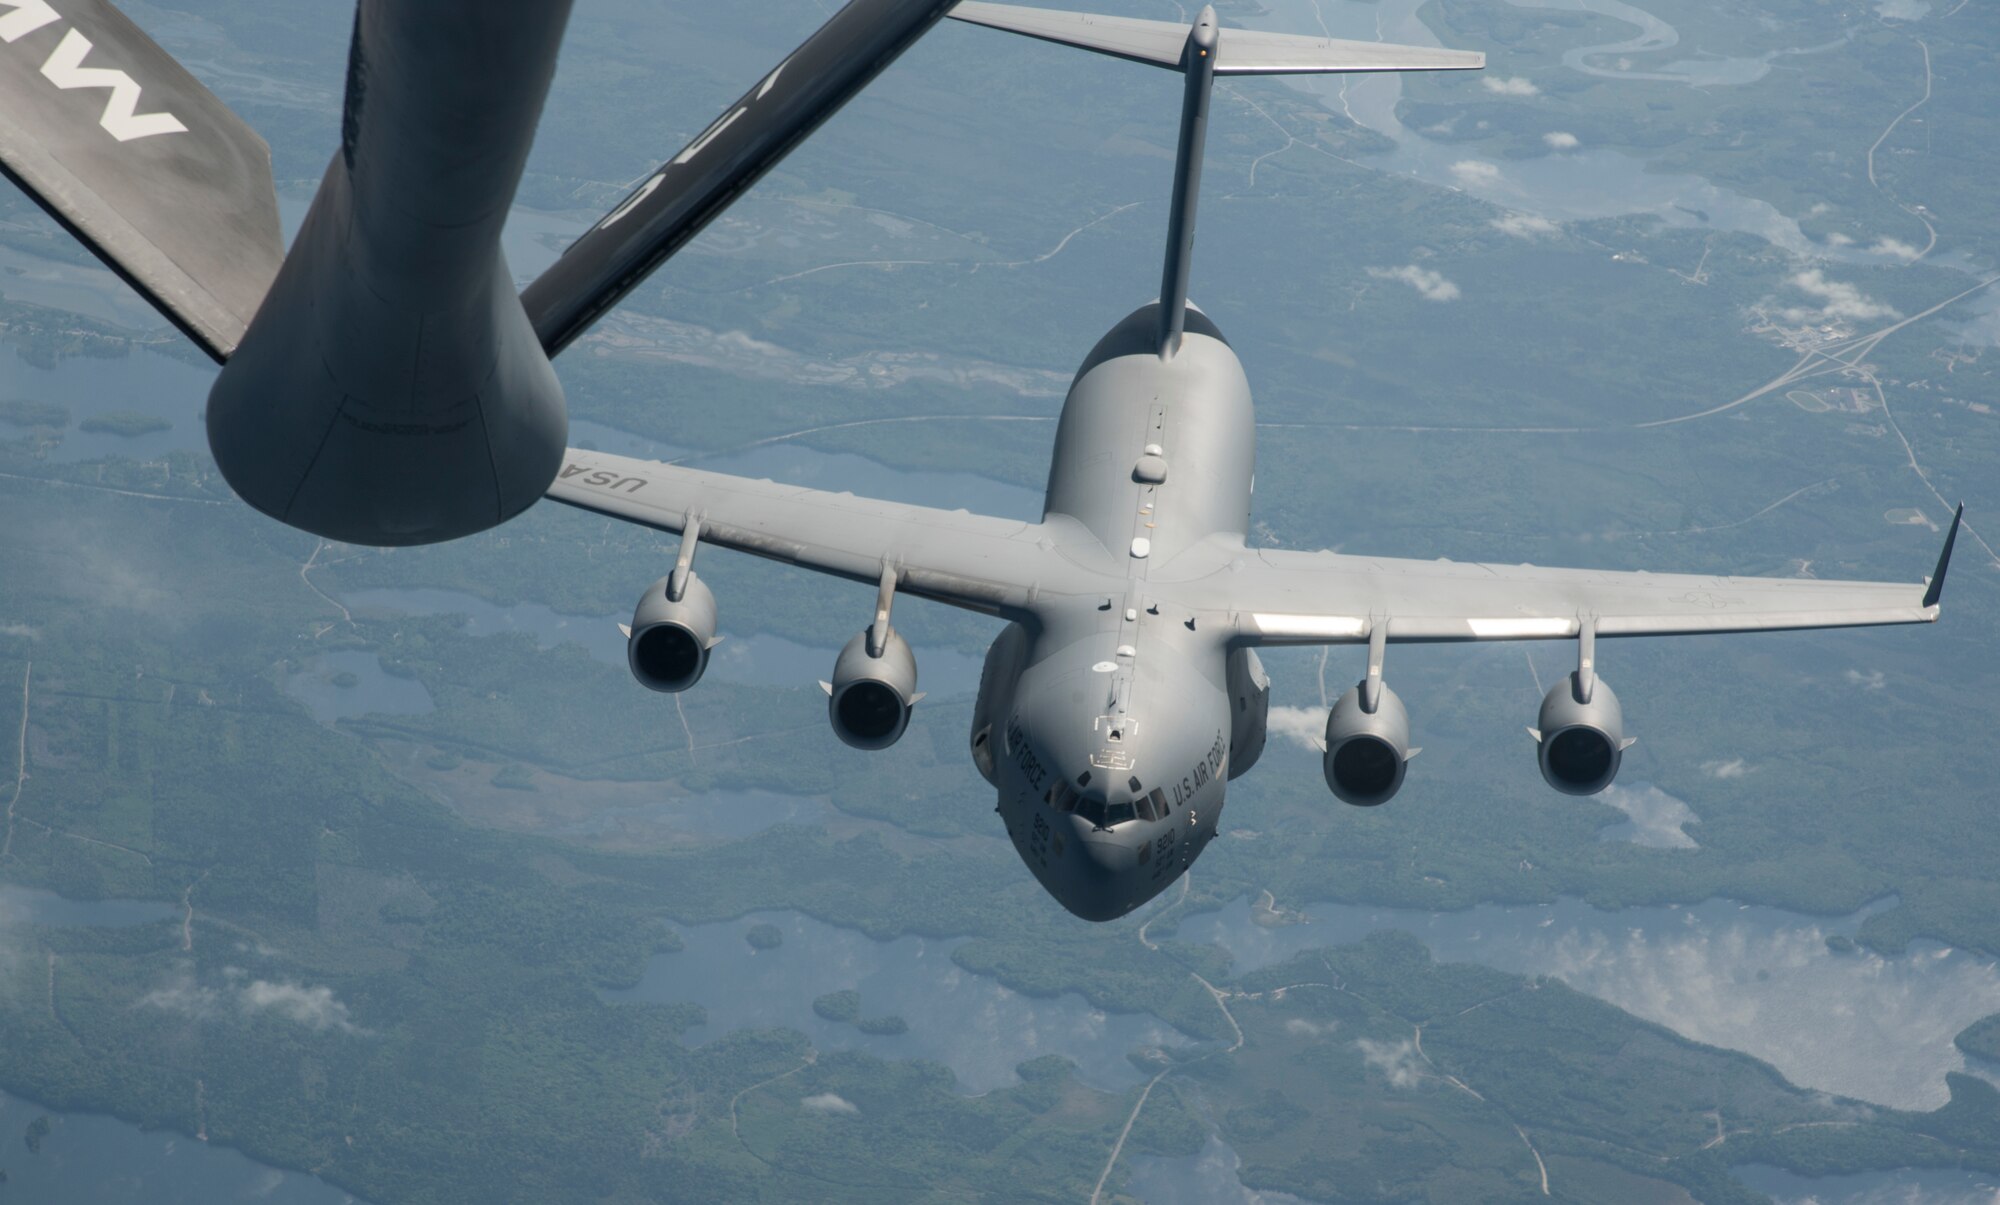 A C-17 Globemaster III aircraft assigned to the 62nd Airlift Wing from Joint Base Lewis-McChord, Wash., prepares to receive fuel over Canada, during Exercise Swift Response 18 (SR18), June 8, 2018.